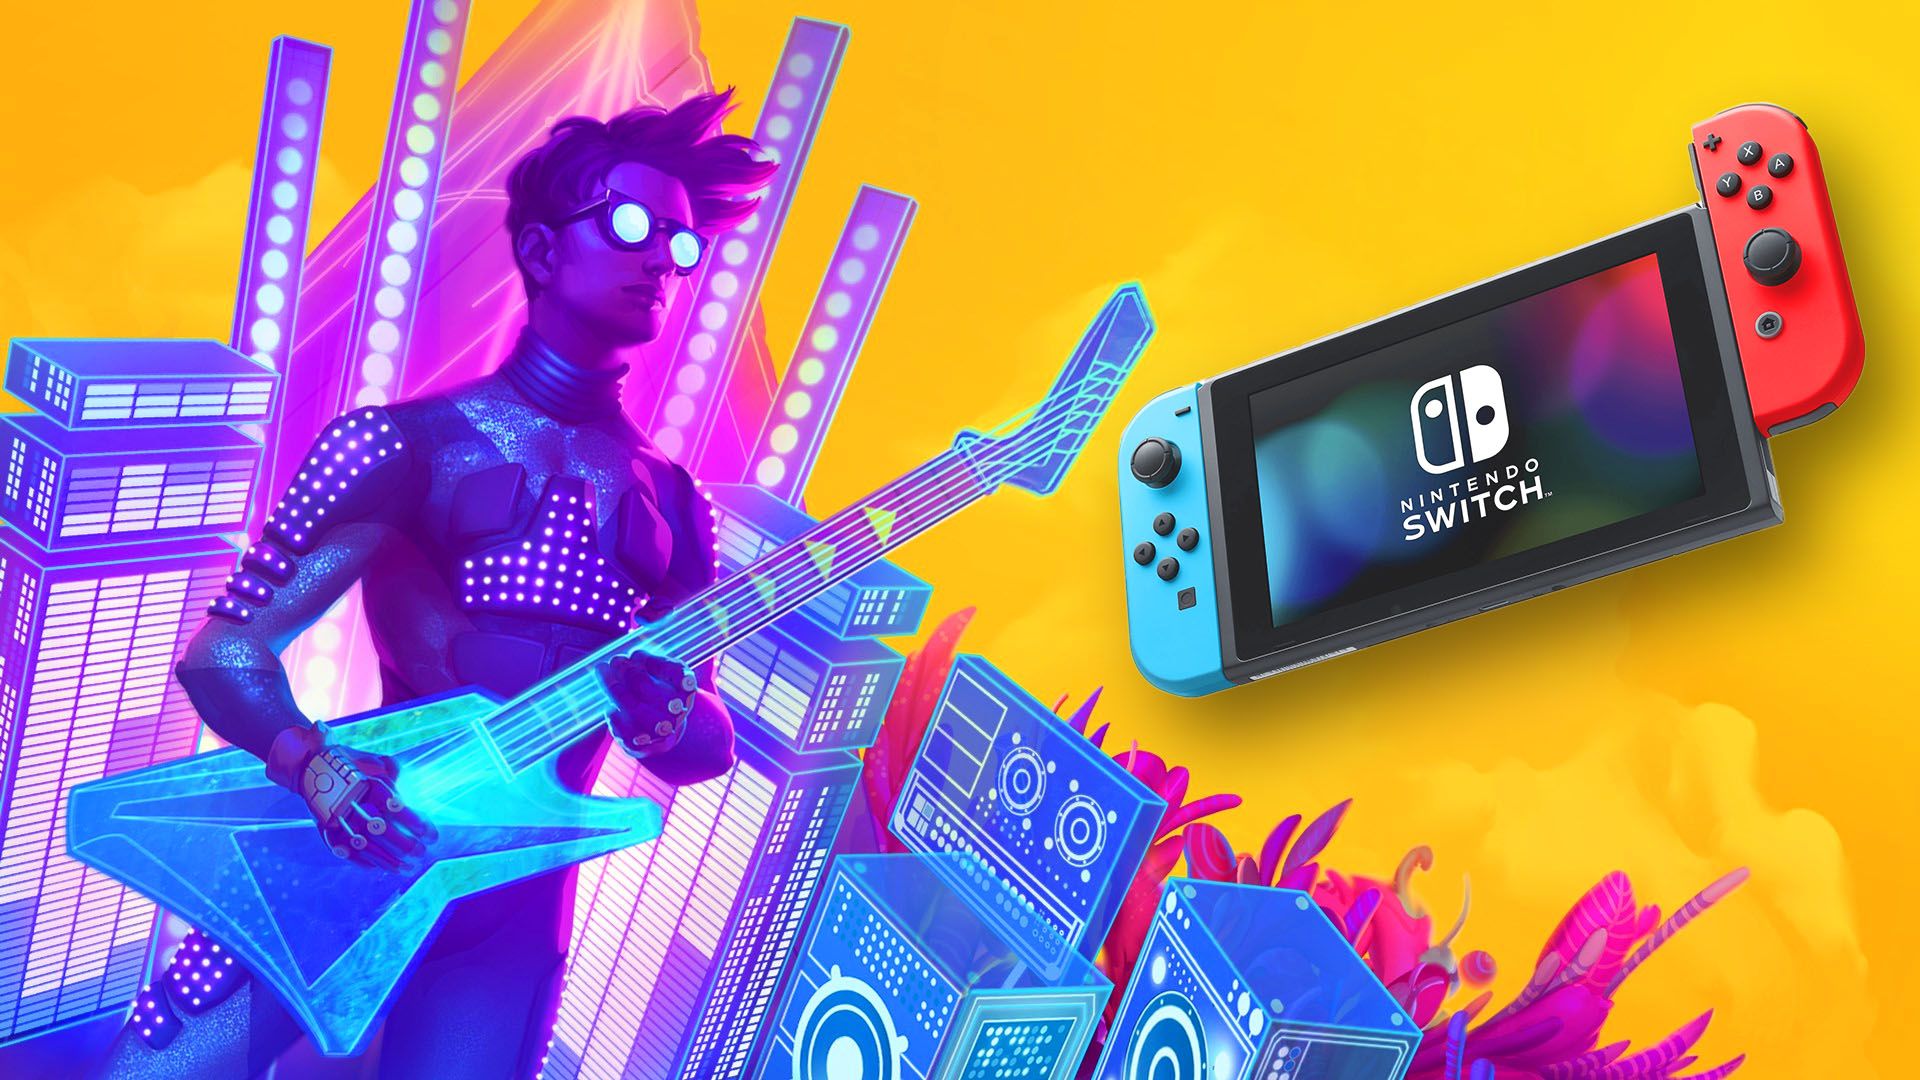 10 Hilarious Comedy Sci-Fi Games You Can Play On The Nintendo Switch - Featured